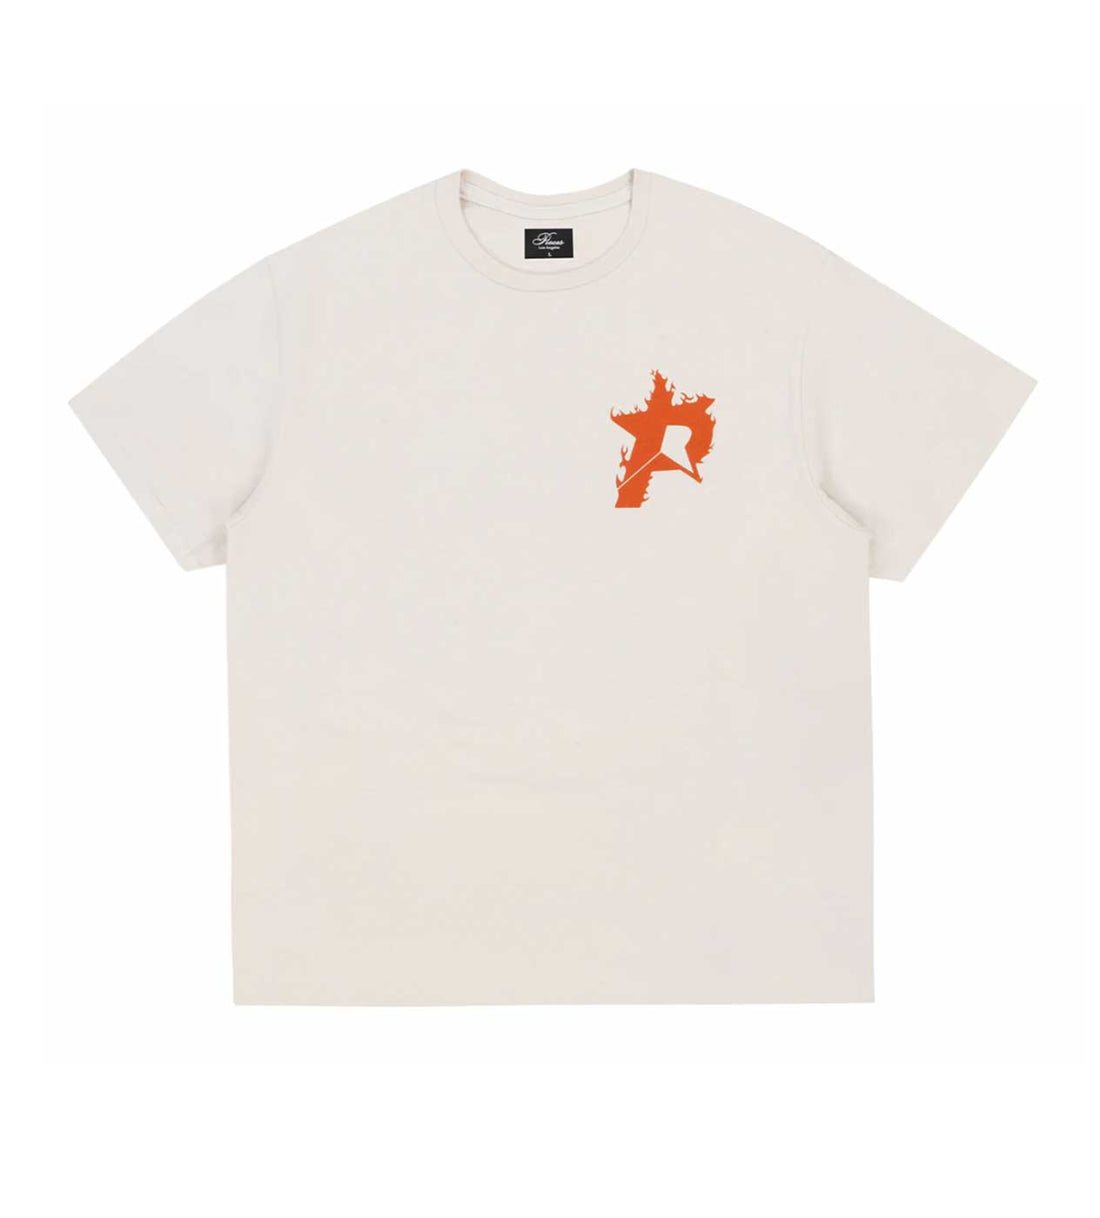 Pieces Star Flames Tee Burnt Orange Front View